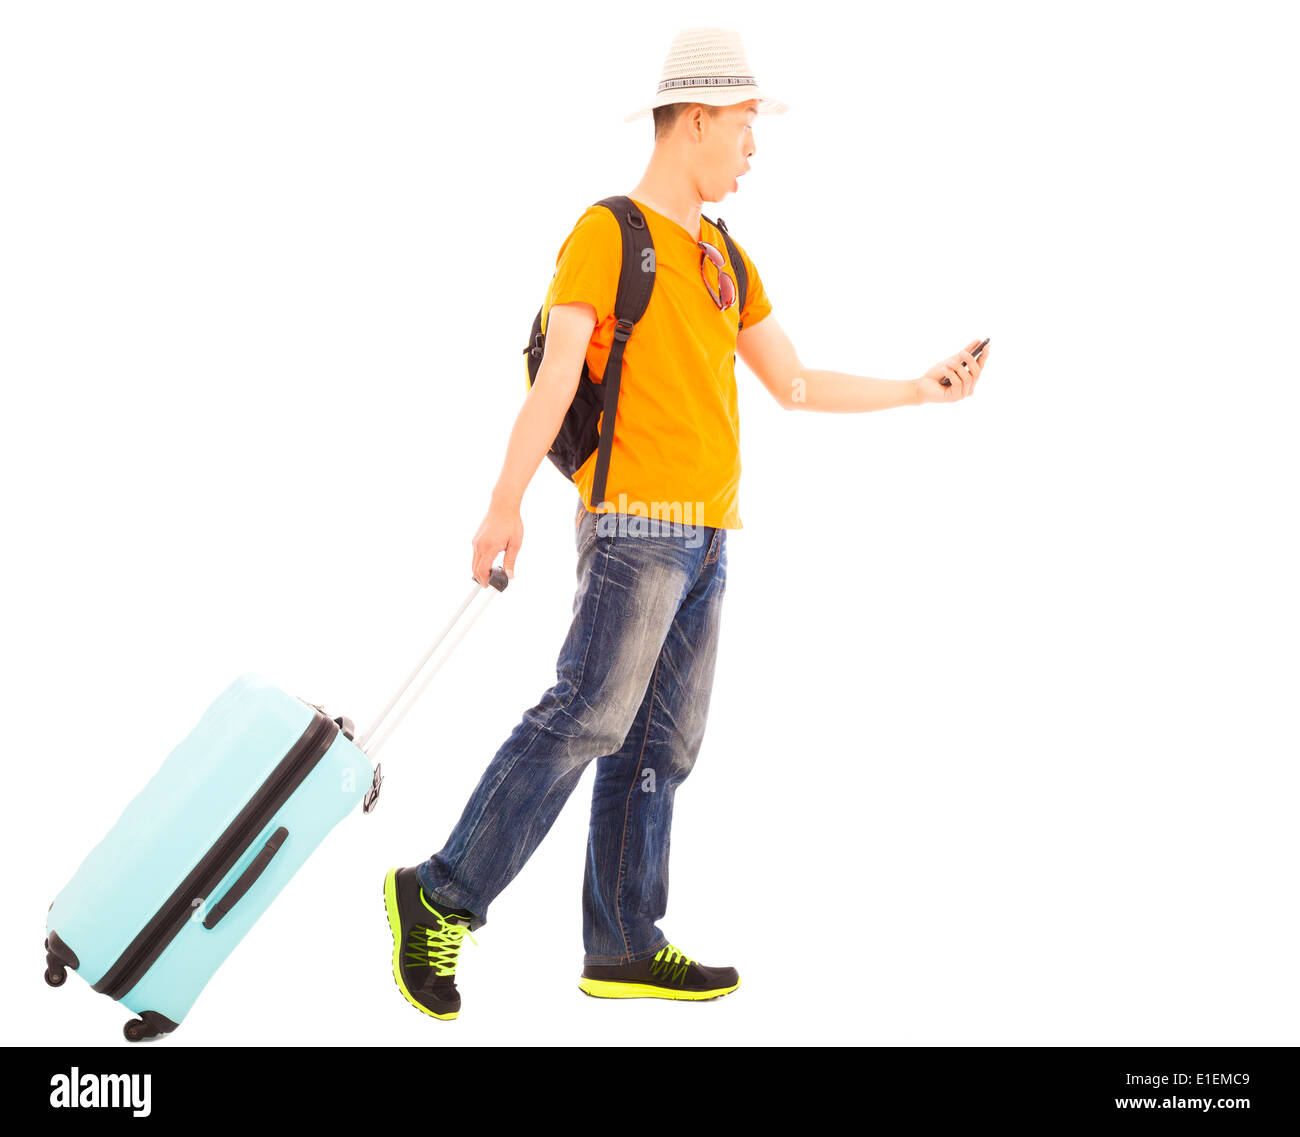 young backpacker carrying a baggage and holding a smartphone Stock Photo